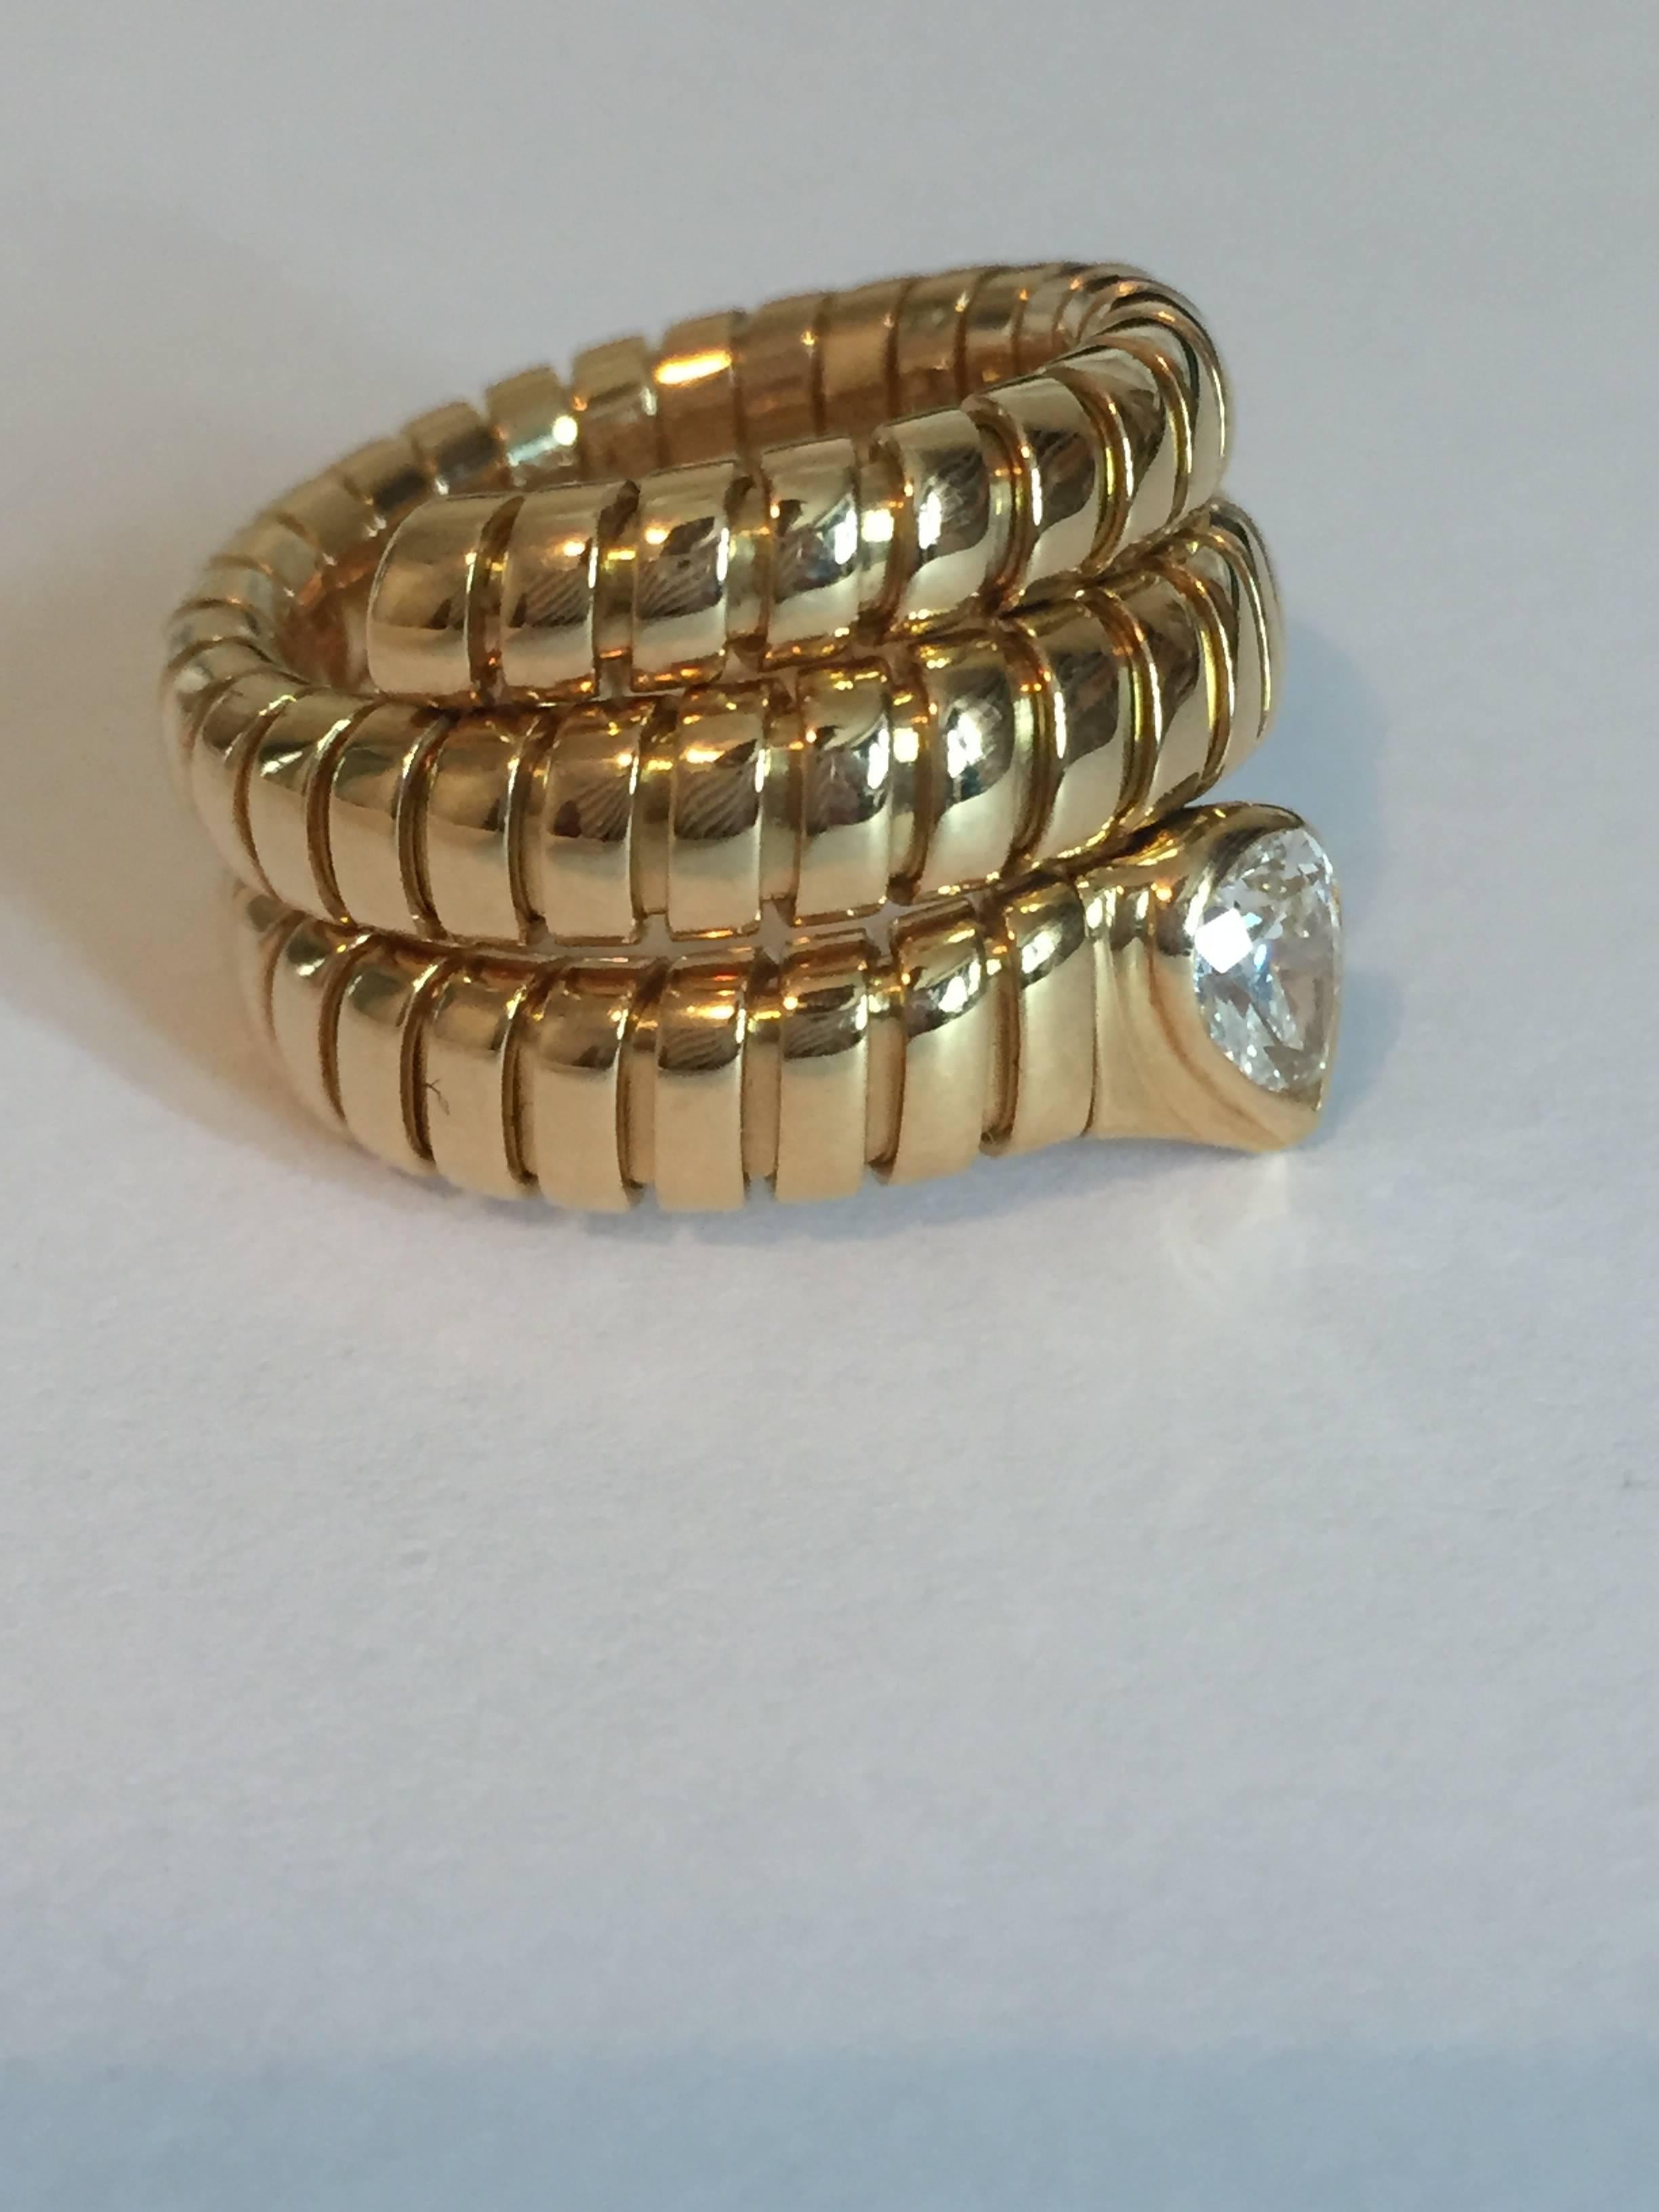 Bulgari  Bvlgari spiga snake ring. Ring is 18KT yellow gold with a  pear shaped diamond with approximately .50cts. in weight . Diamond is  F in color and VS in clarity. Ring weighs 14.80 grams and it is a size 6 1/2. Ring is adjustable so the size